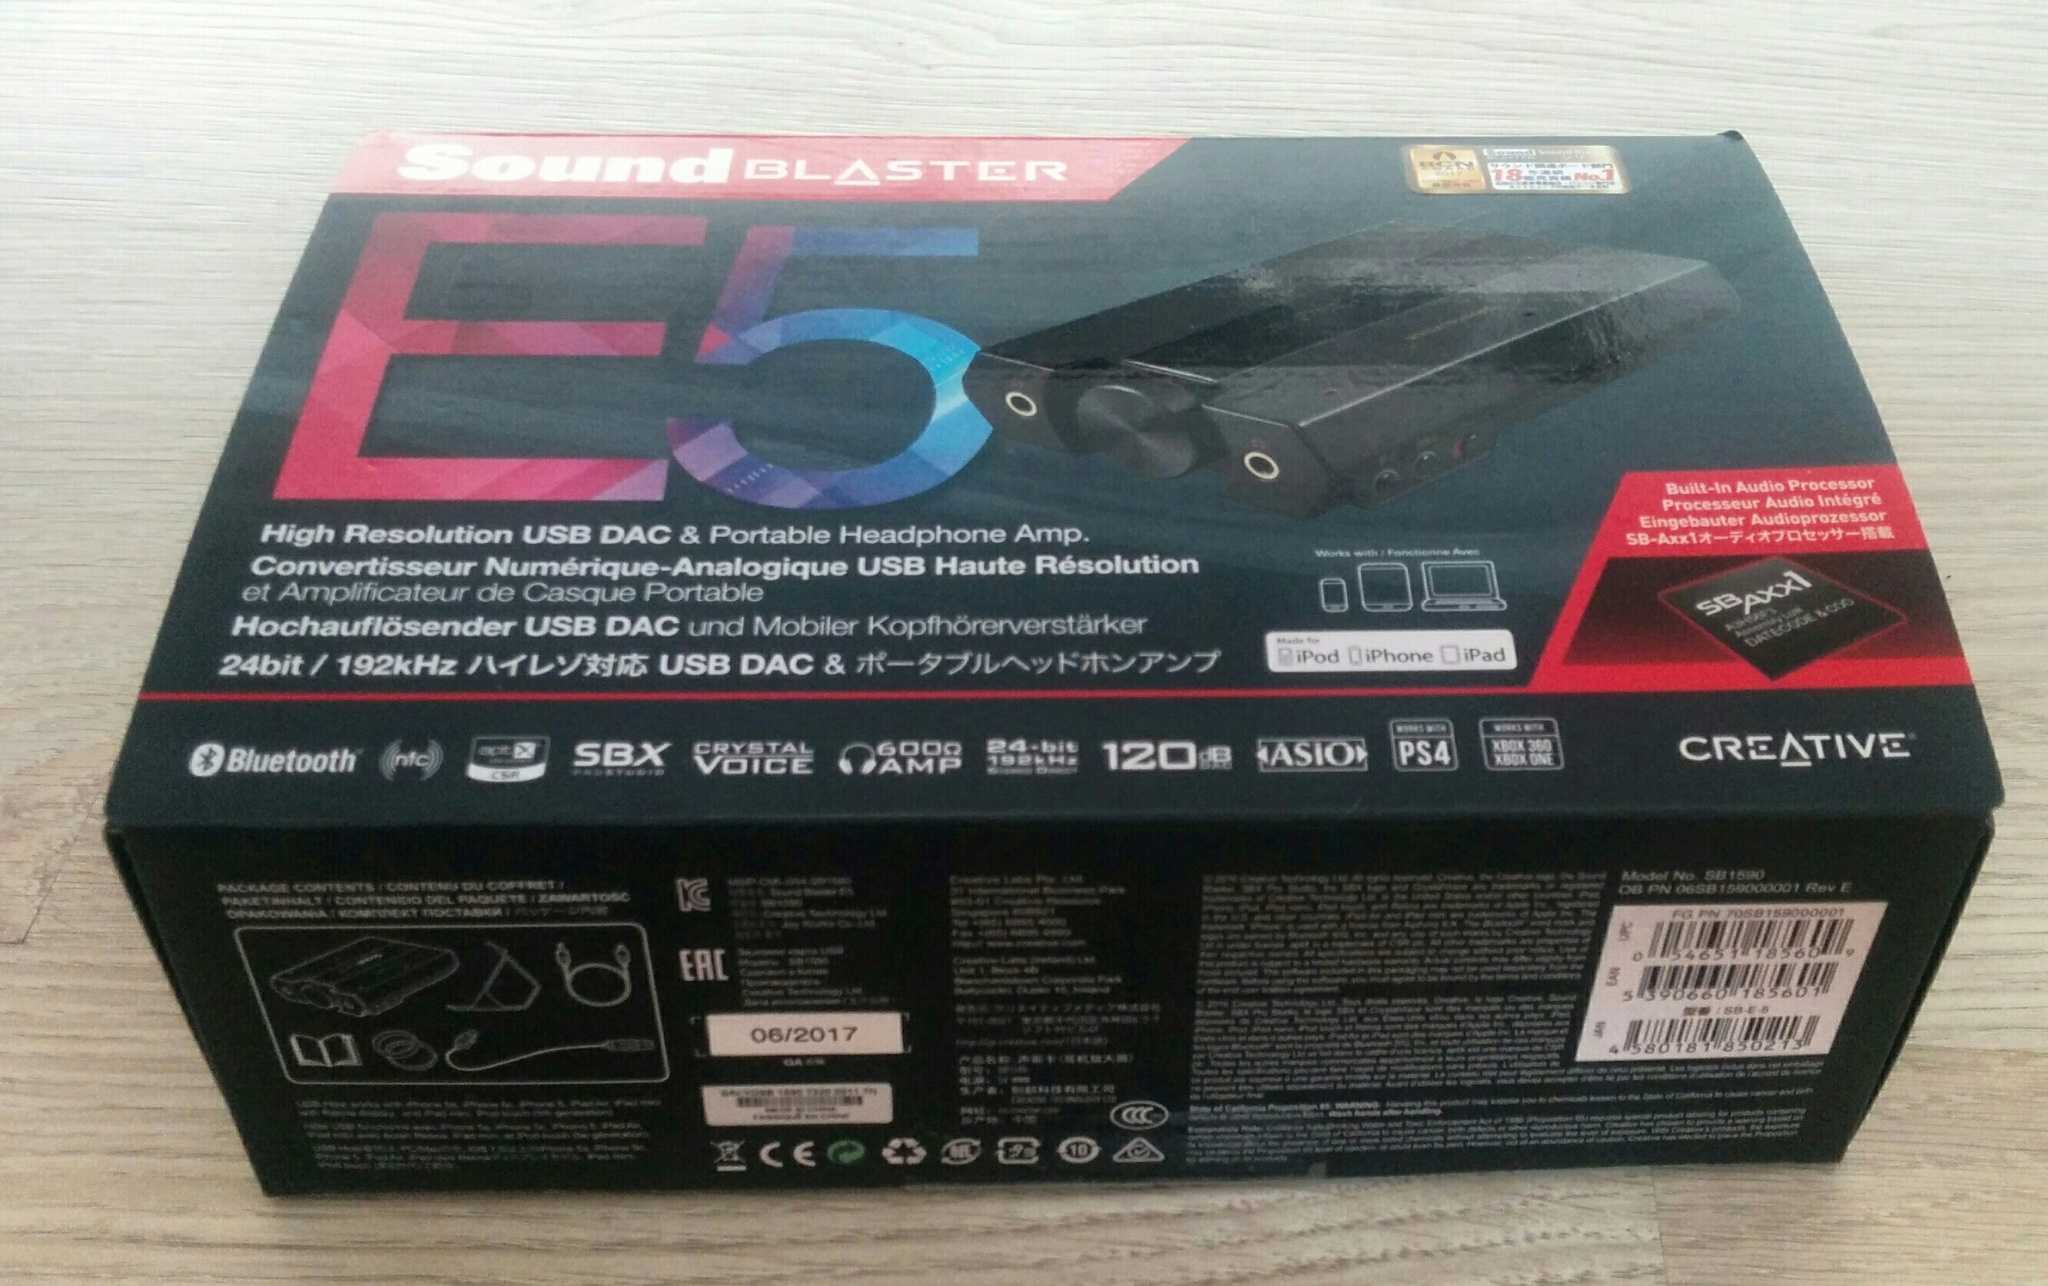 Creative sound blaster e5 review - is it worth your money?